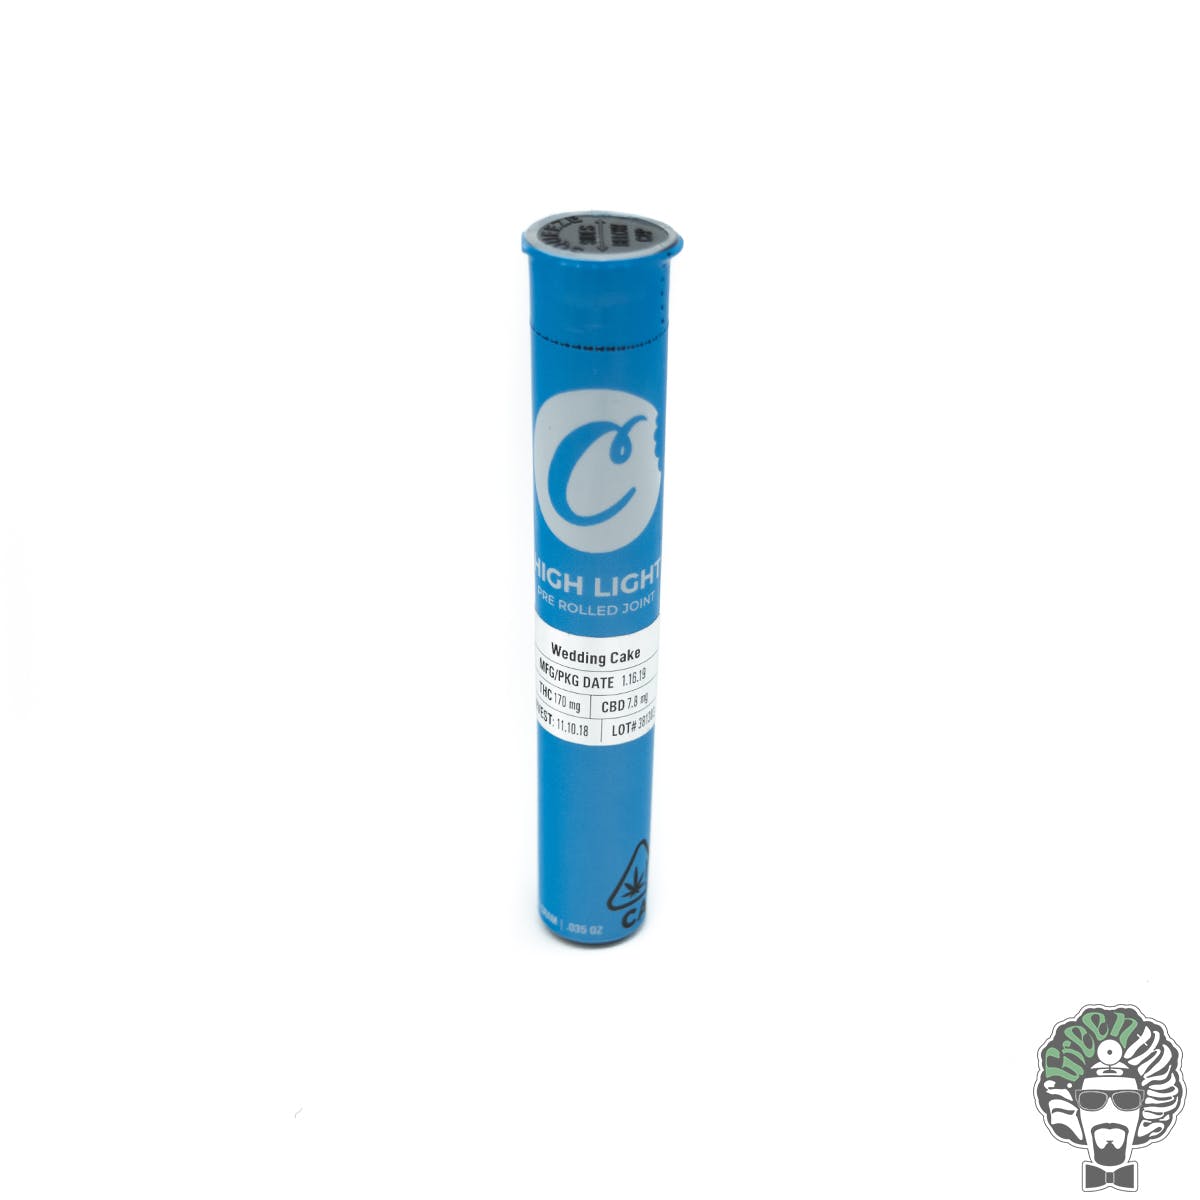 preroll-wedding-cake-highlight-single-pre-roll-by-cookies